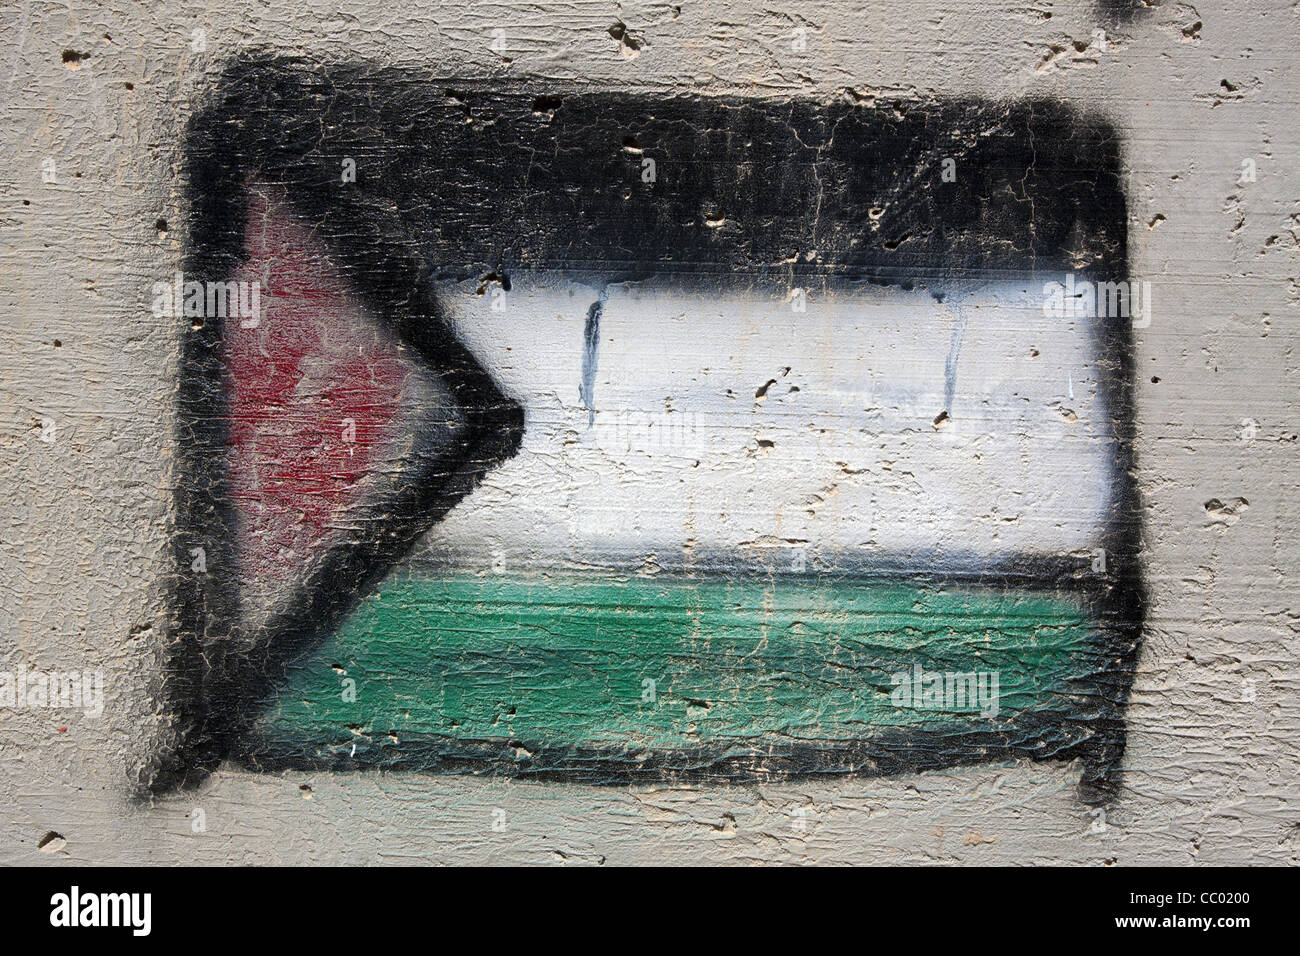 PALESTINIAN FLAG PAINTED ON THE WALL SEPARATING ISRAELI AND PALESTINIAN TERRITORIES, BETHLEHEM, WEST BANK, PALESTINIAN AUTHORITY Stock Photo